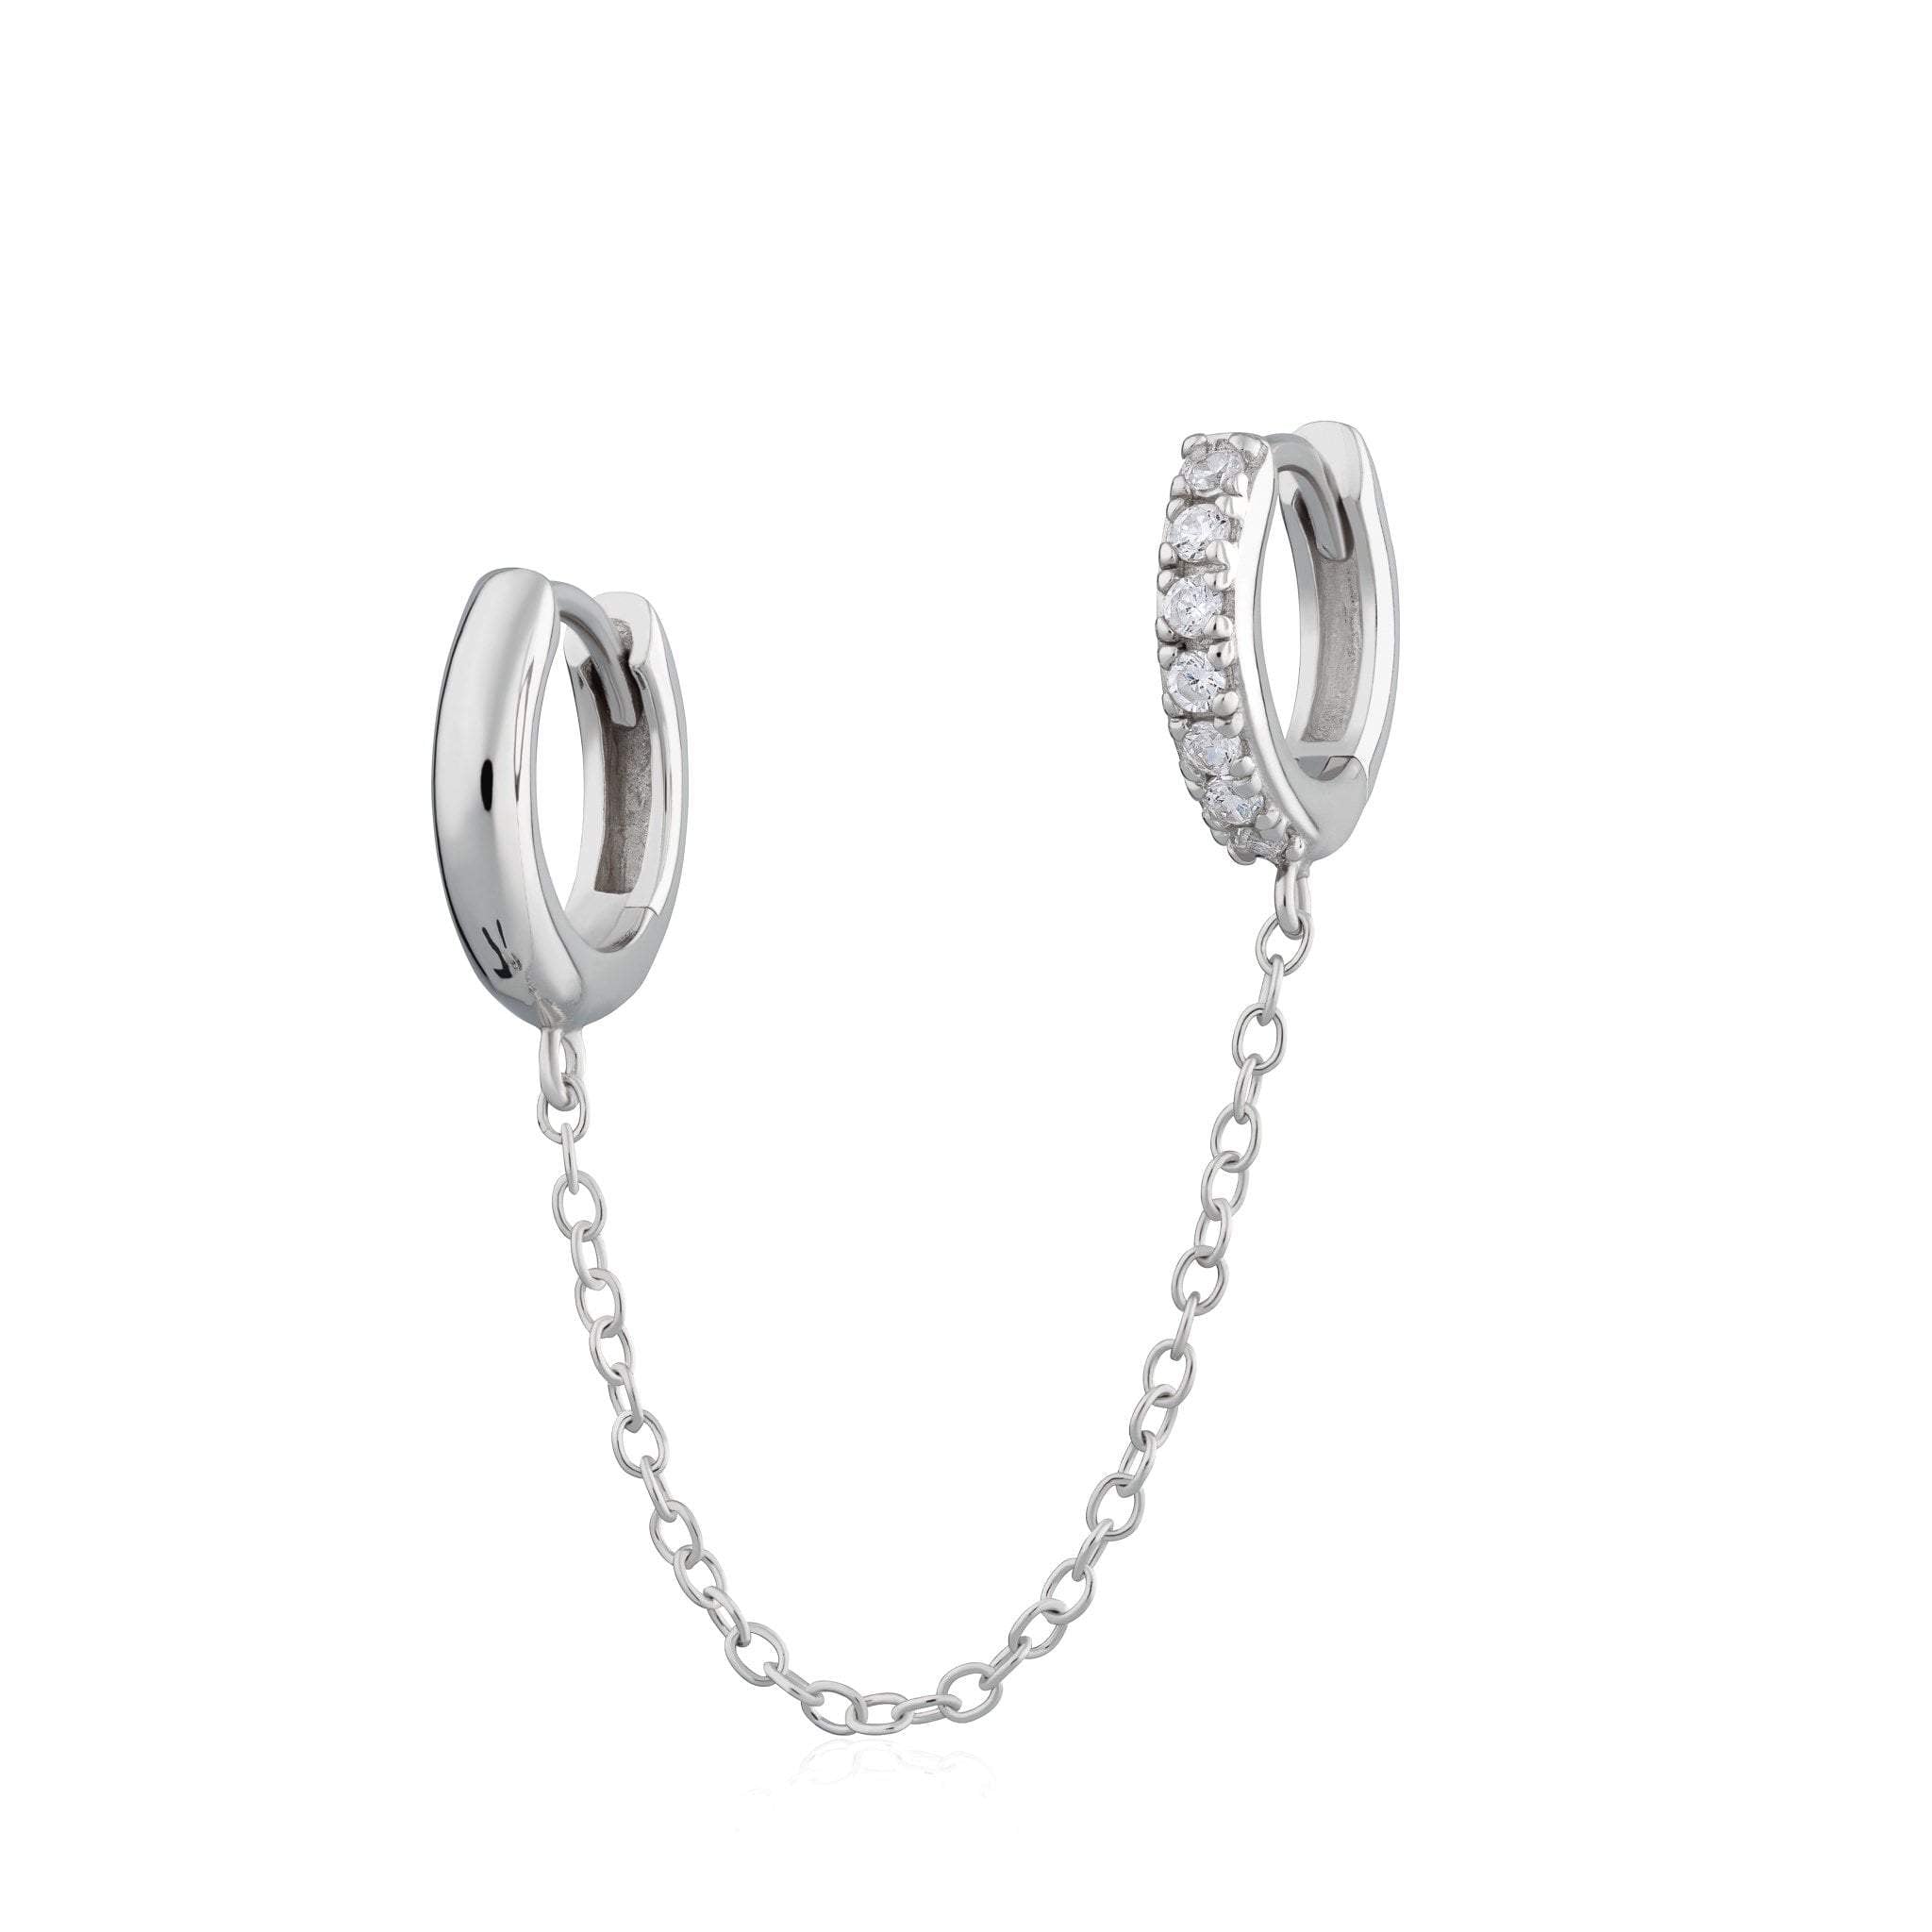  Chain Linked Mismatched Single Huggie Earring - by Scream Pretty